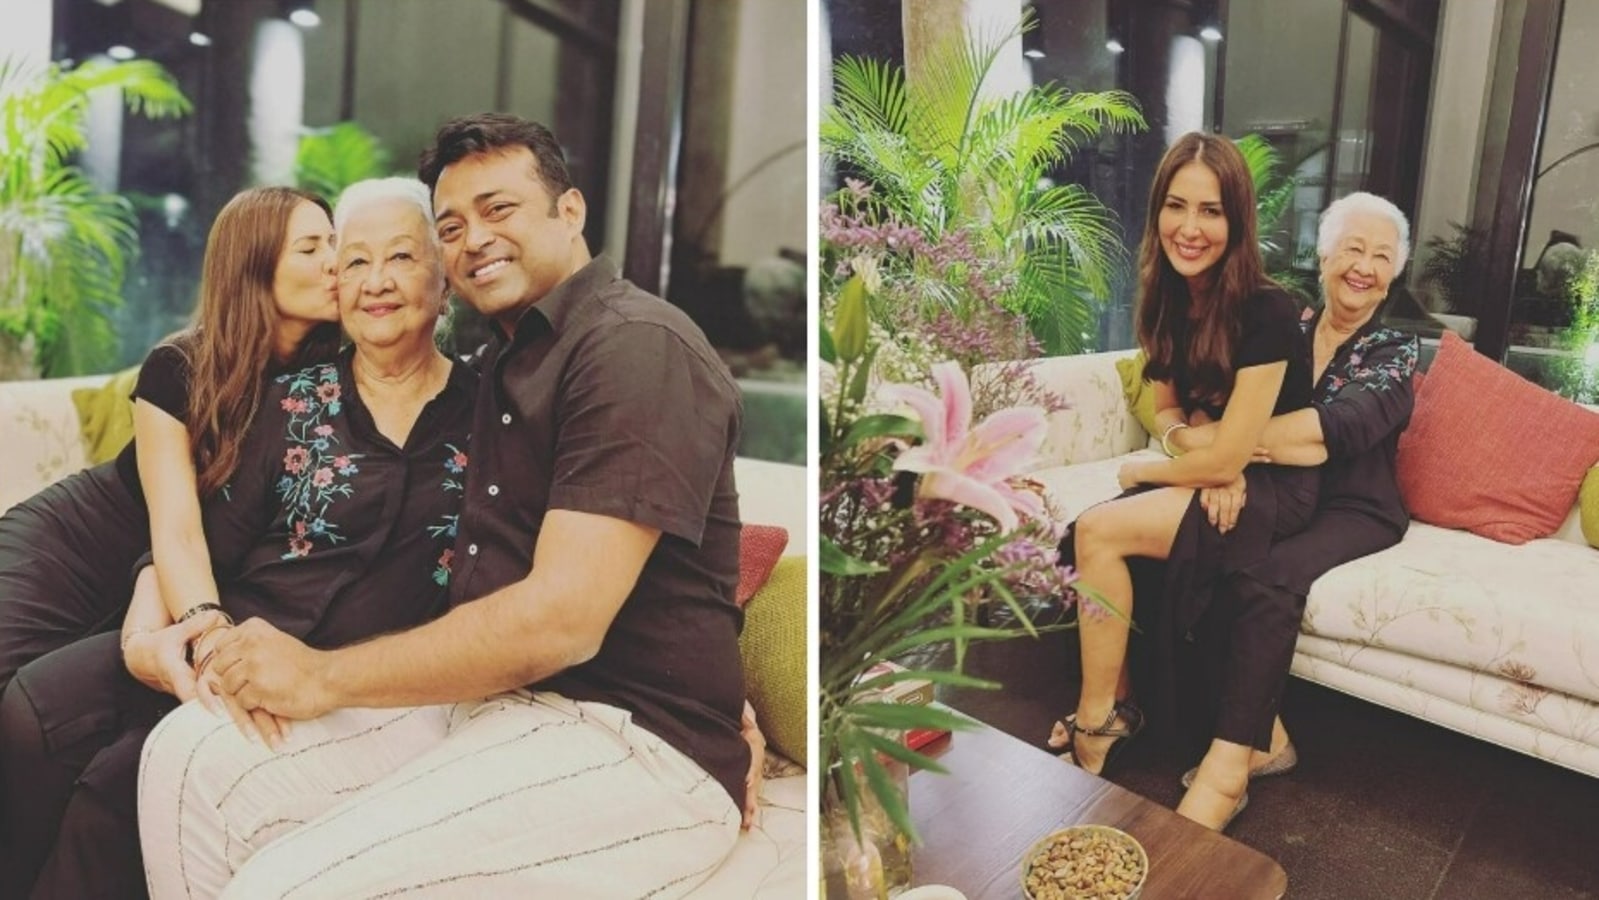 Kim Sharma celebrates mom’s 80th birthday with Leander Paes in Goa: ‘Love you so much’